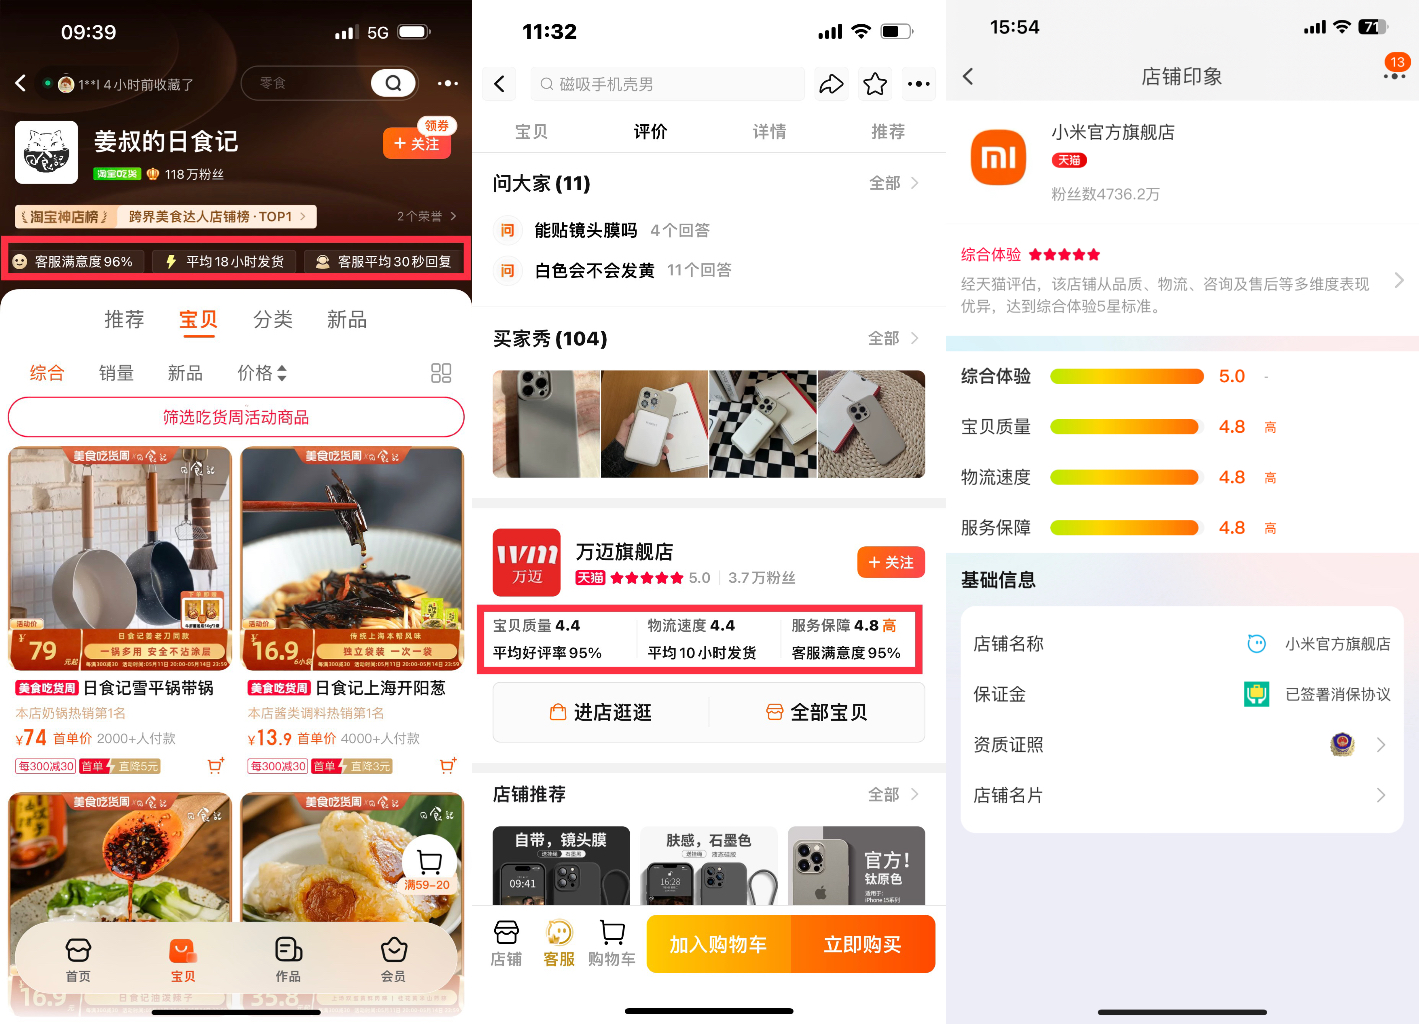 Taobao Tmall updates its rating system, strengthening the impact of store experience scores on search rankings.